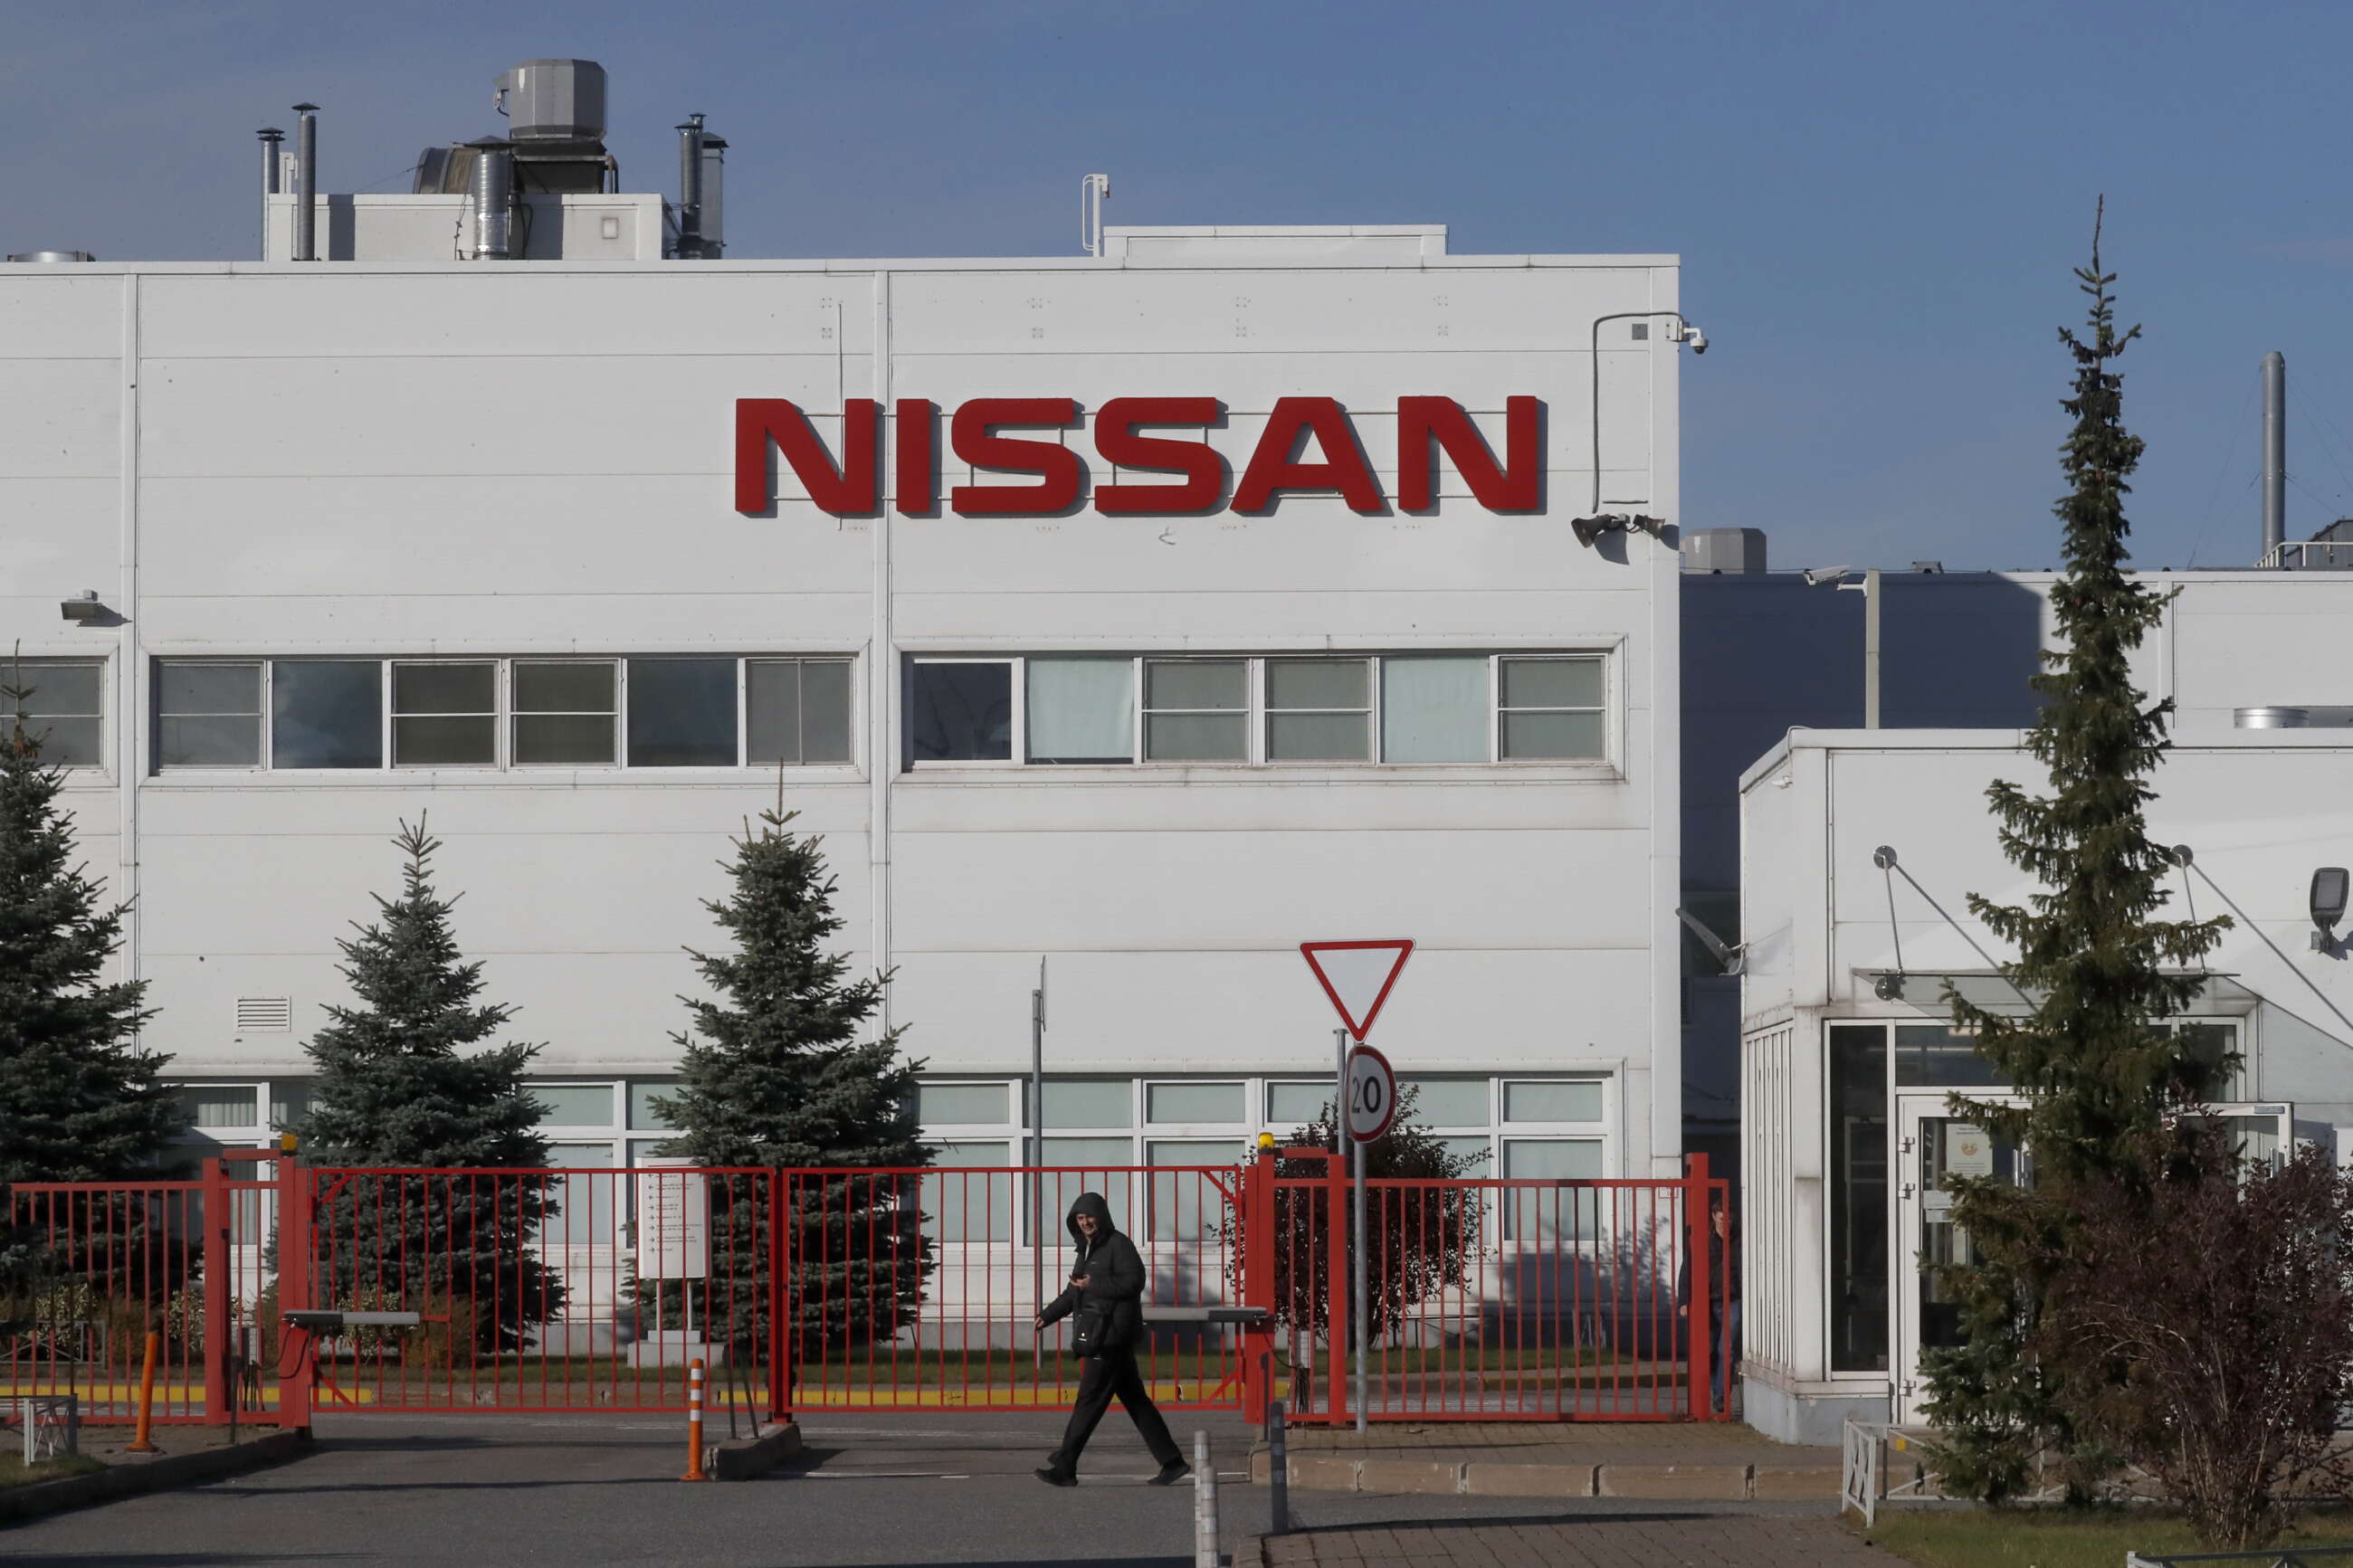 St. Petersburg (Russian Federation), 11/10/2022.- Exterior view of the Nissan Manufacturing Rus LLC plant in St. Petersburg, Russia, 11 October 2022. Japanese automaker Nissan announced on 11 October, it will sell its Russian business for 1 euro, with a repurchase option for six years, to the ownership of the Russian FSUE NAMI. Nissan will transfer assets in the Russian Federation, including production and research facilities in St. Petersburg, as well as a sales and marketing center in Moscow, as the press service of the Ministry of Industry and Trade of the Russian Federation reported. (Japón, Rusia, Moscú, San Petersburgo) EFE/EPA/ANATOLY MALTSEV